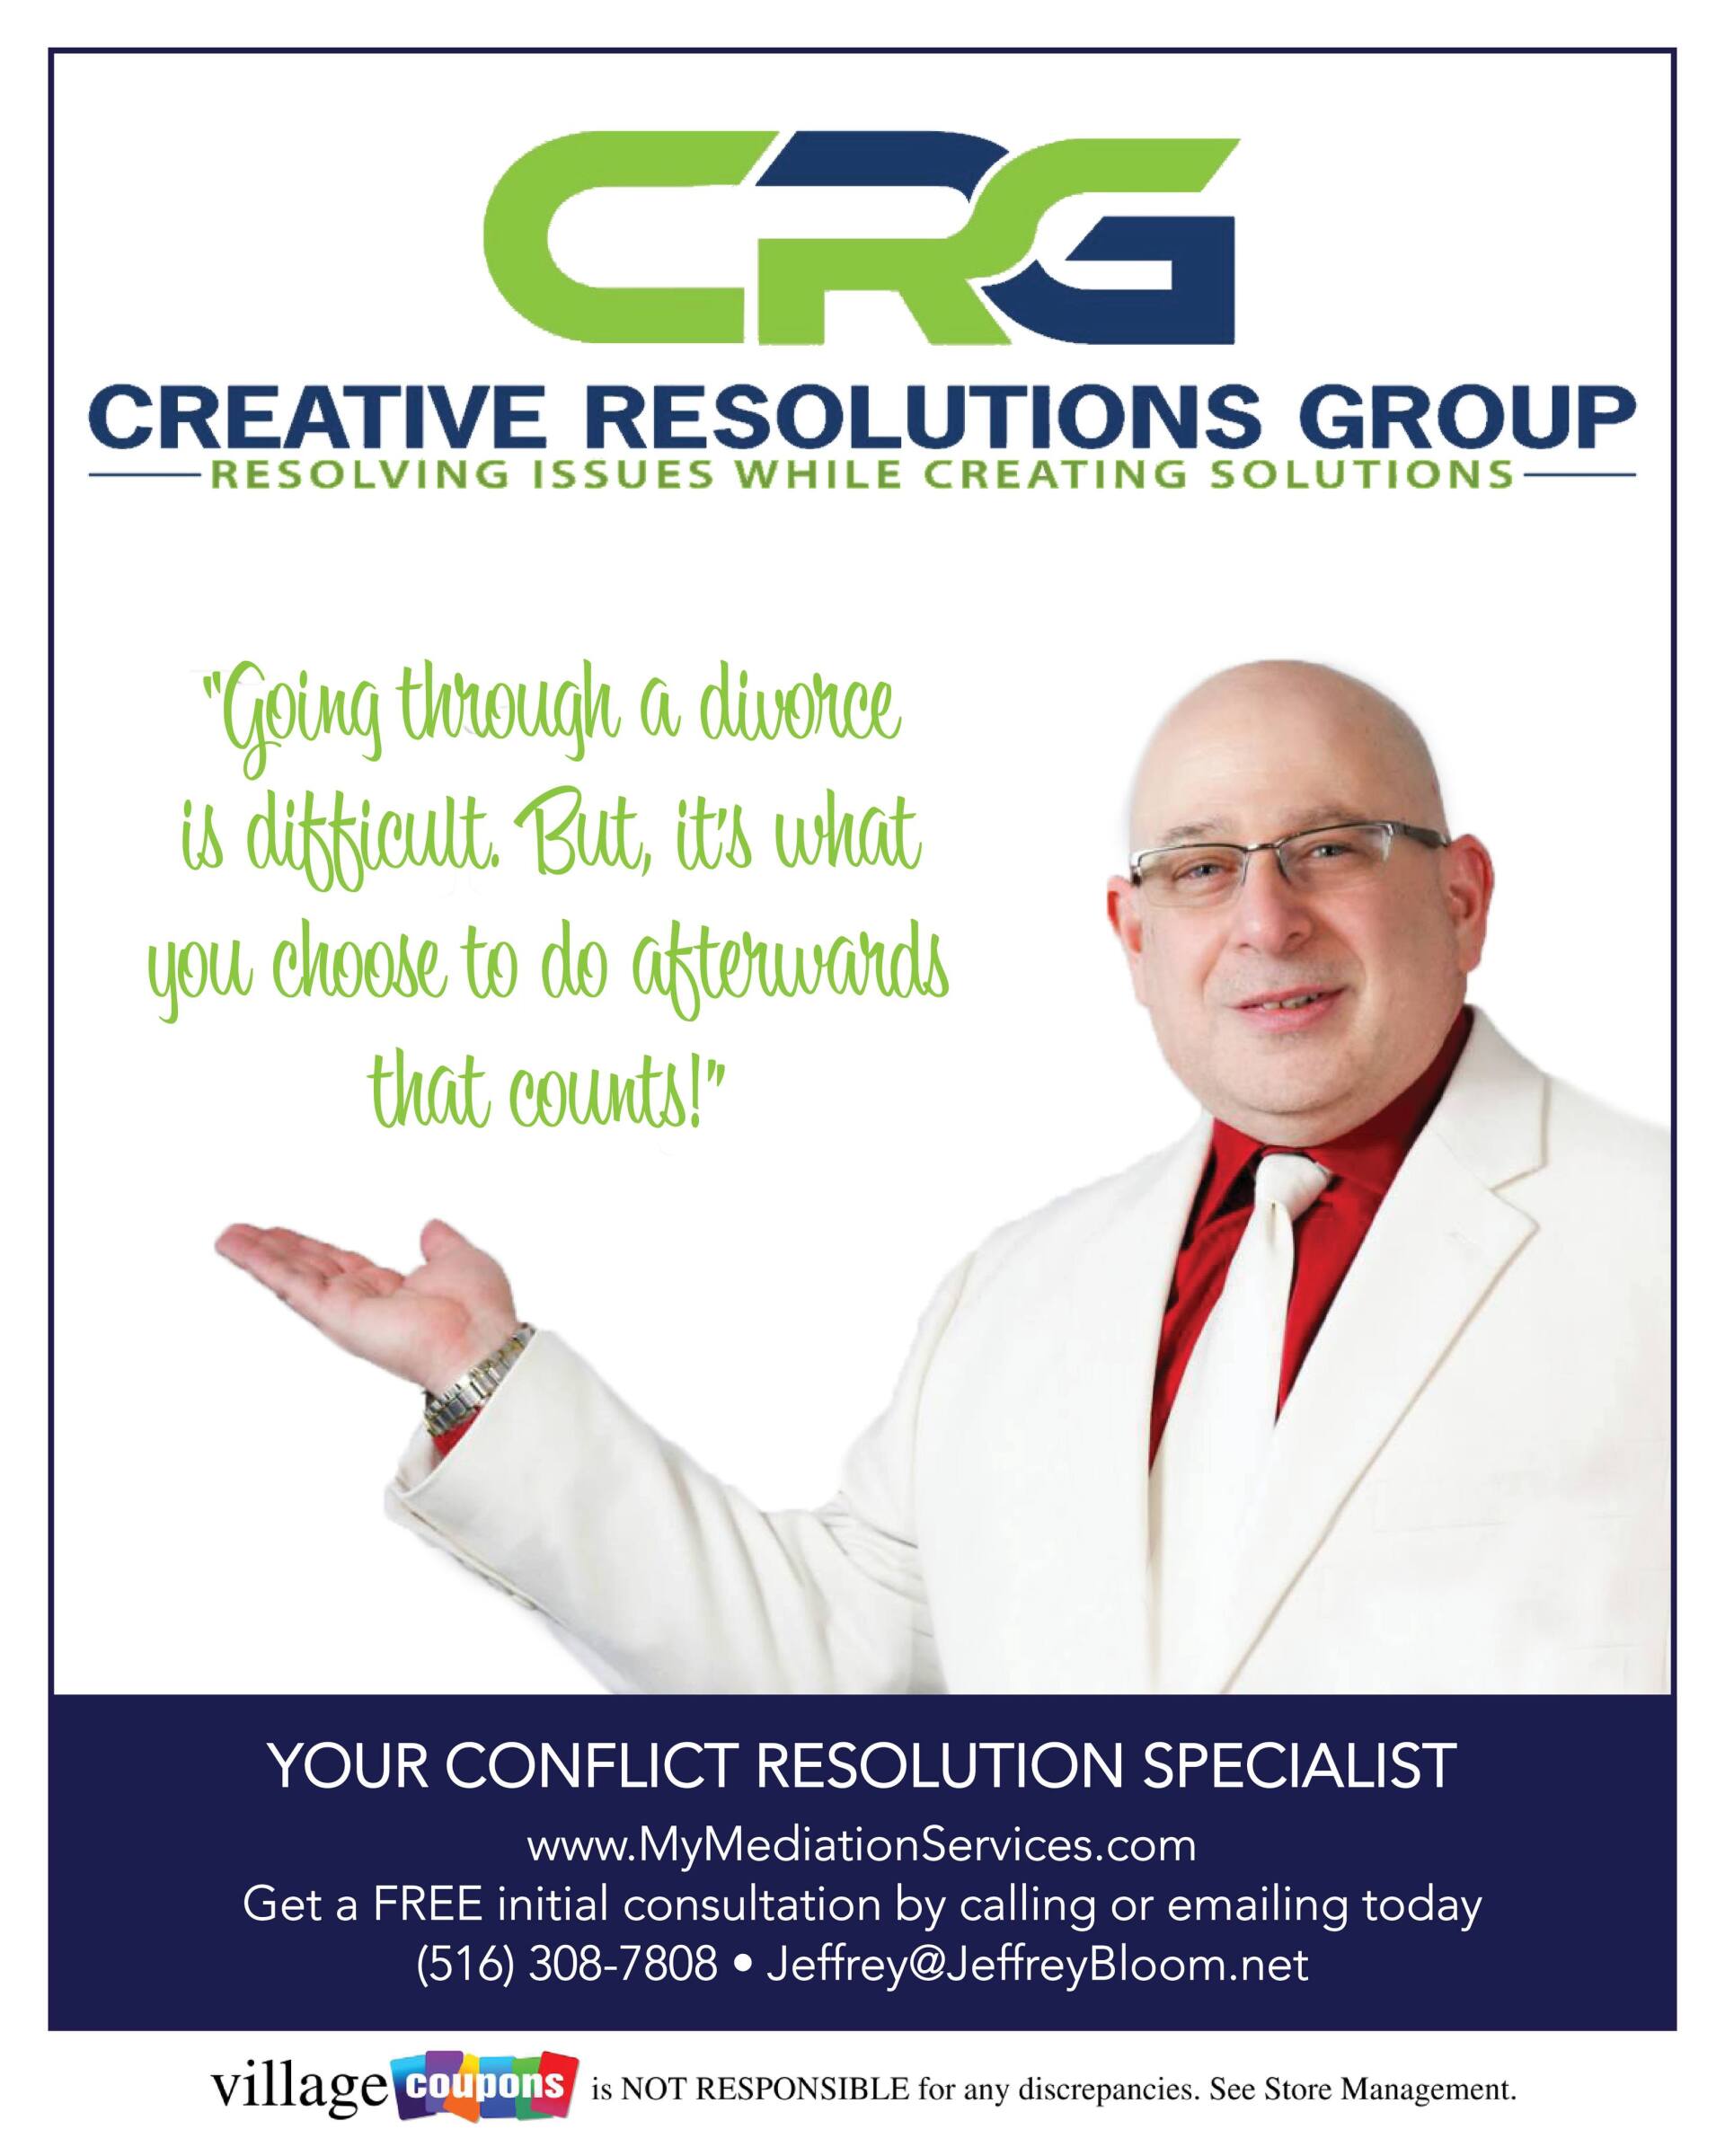 An advertisement for creative resolutions group shows a bald man in a white suit